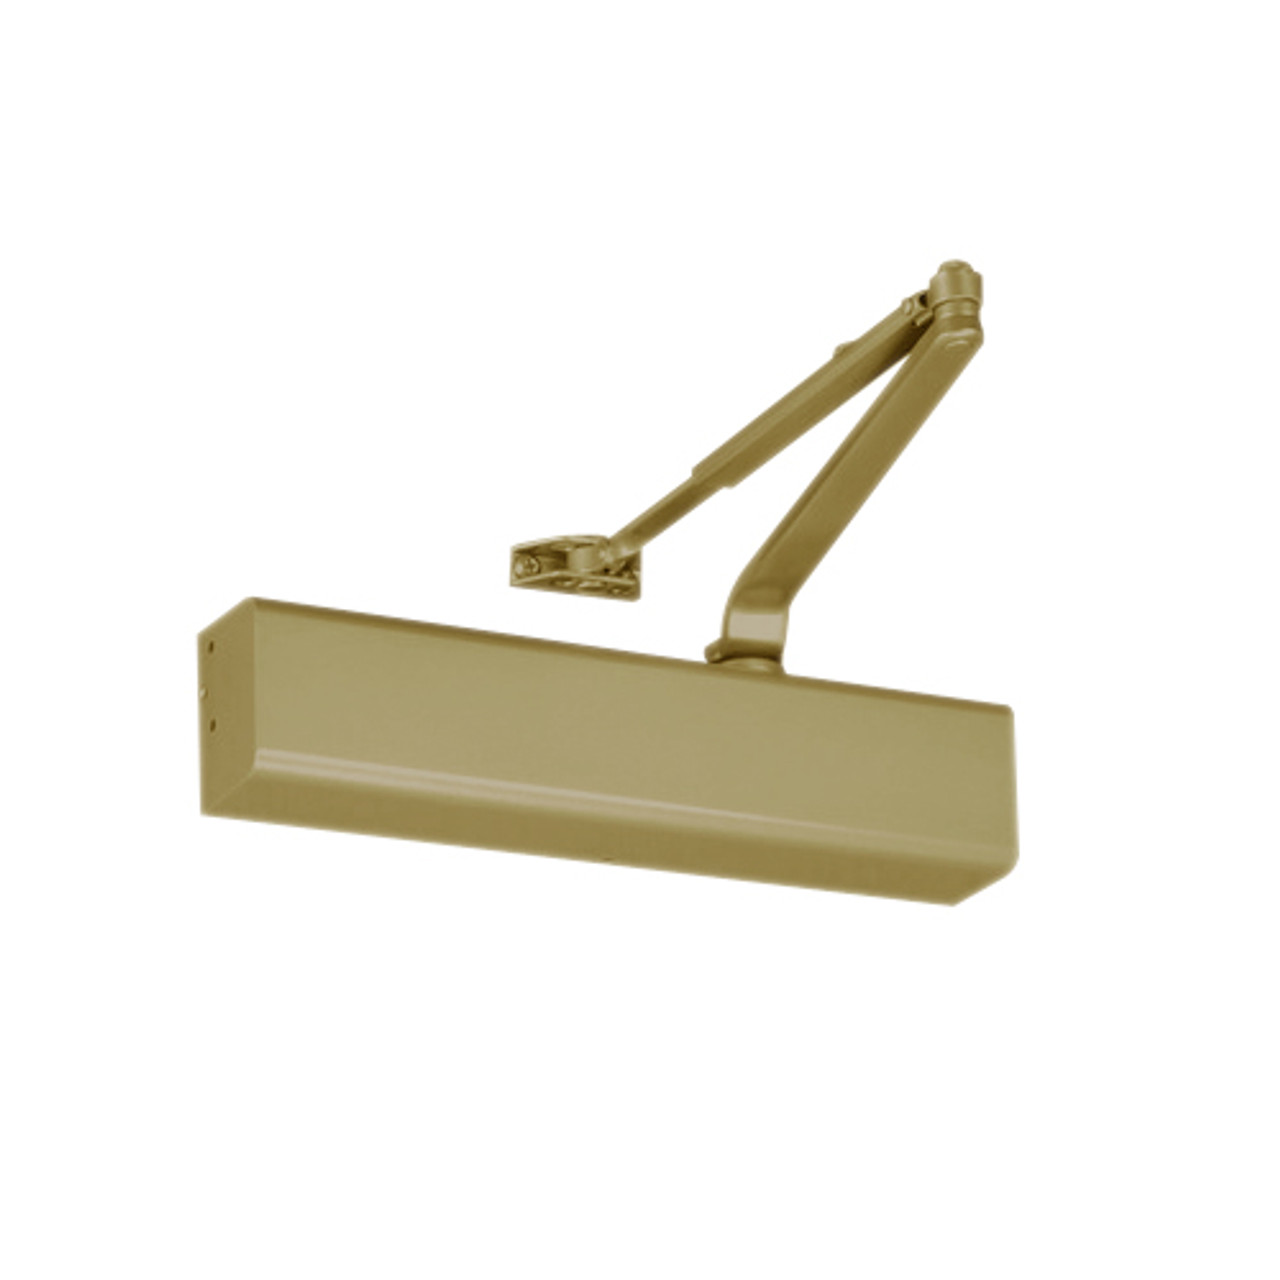 8501HM-696 Norton 8000 Series Full Cover Hold Open Door Closers with Regular Parallel and Top Jamb to 2-3/4 inch Reveal in Gold Finish